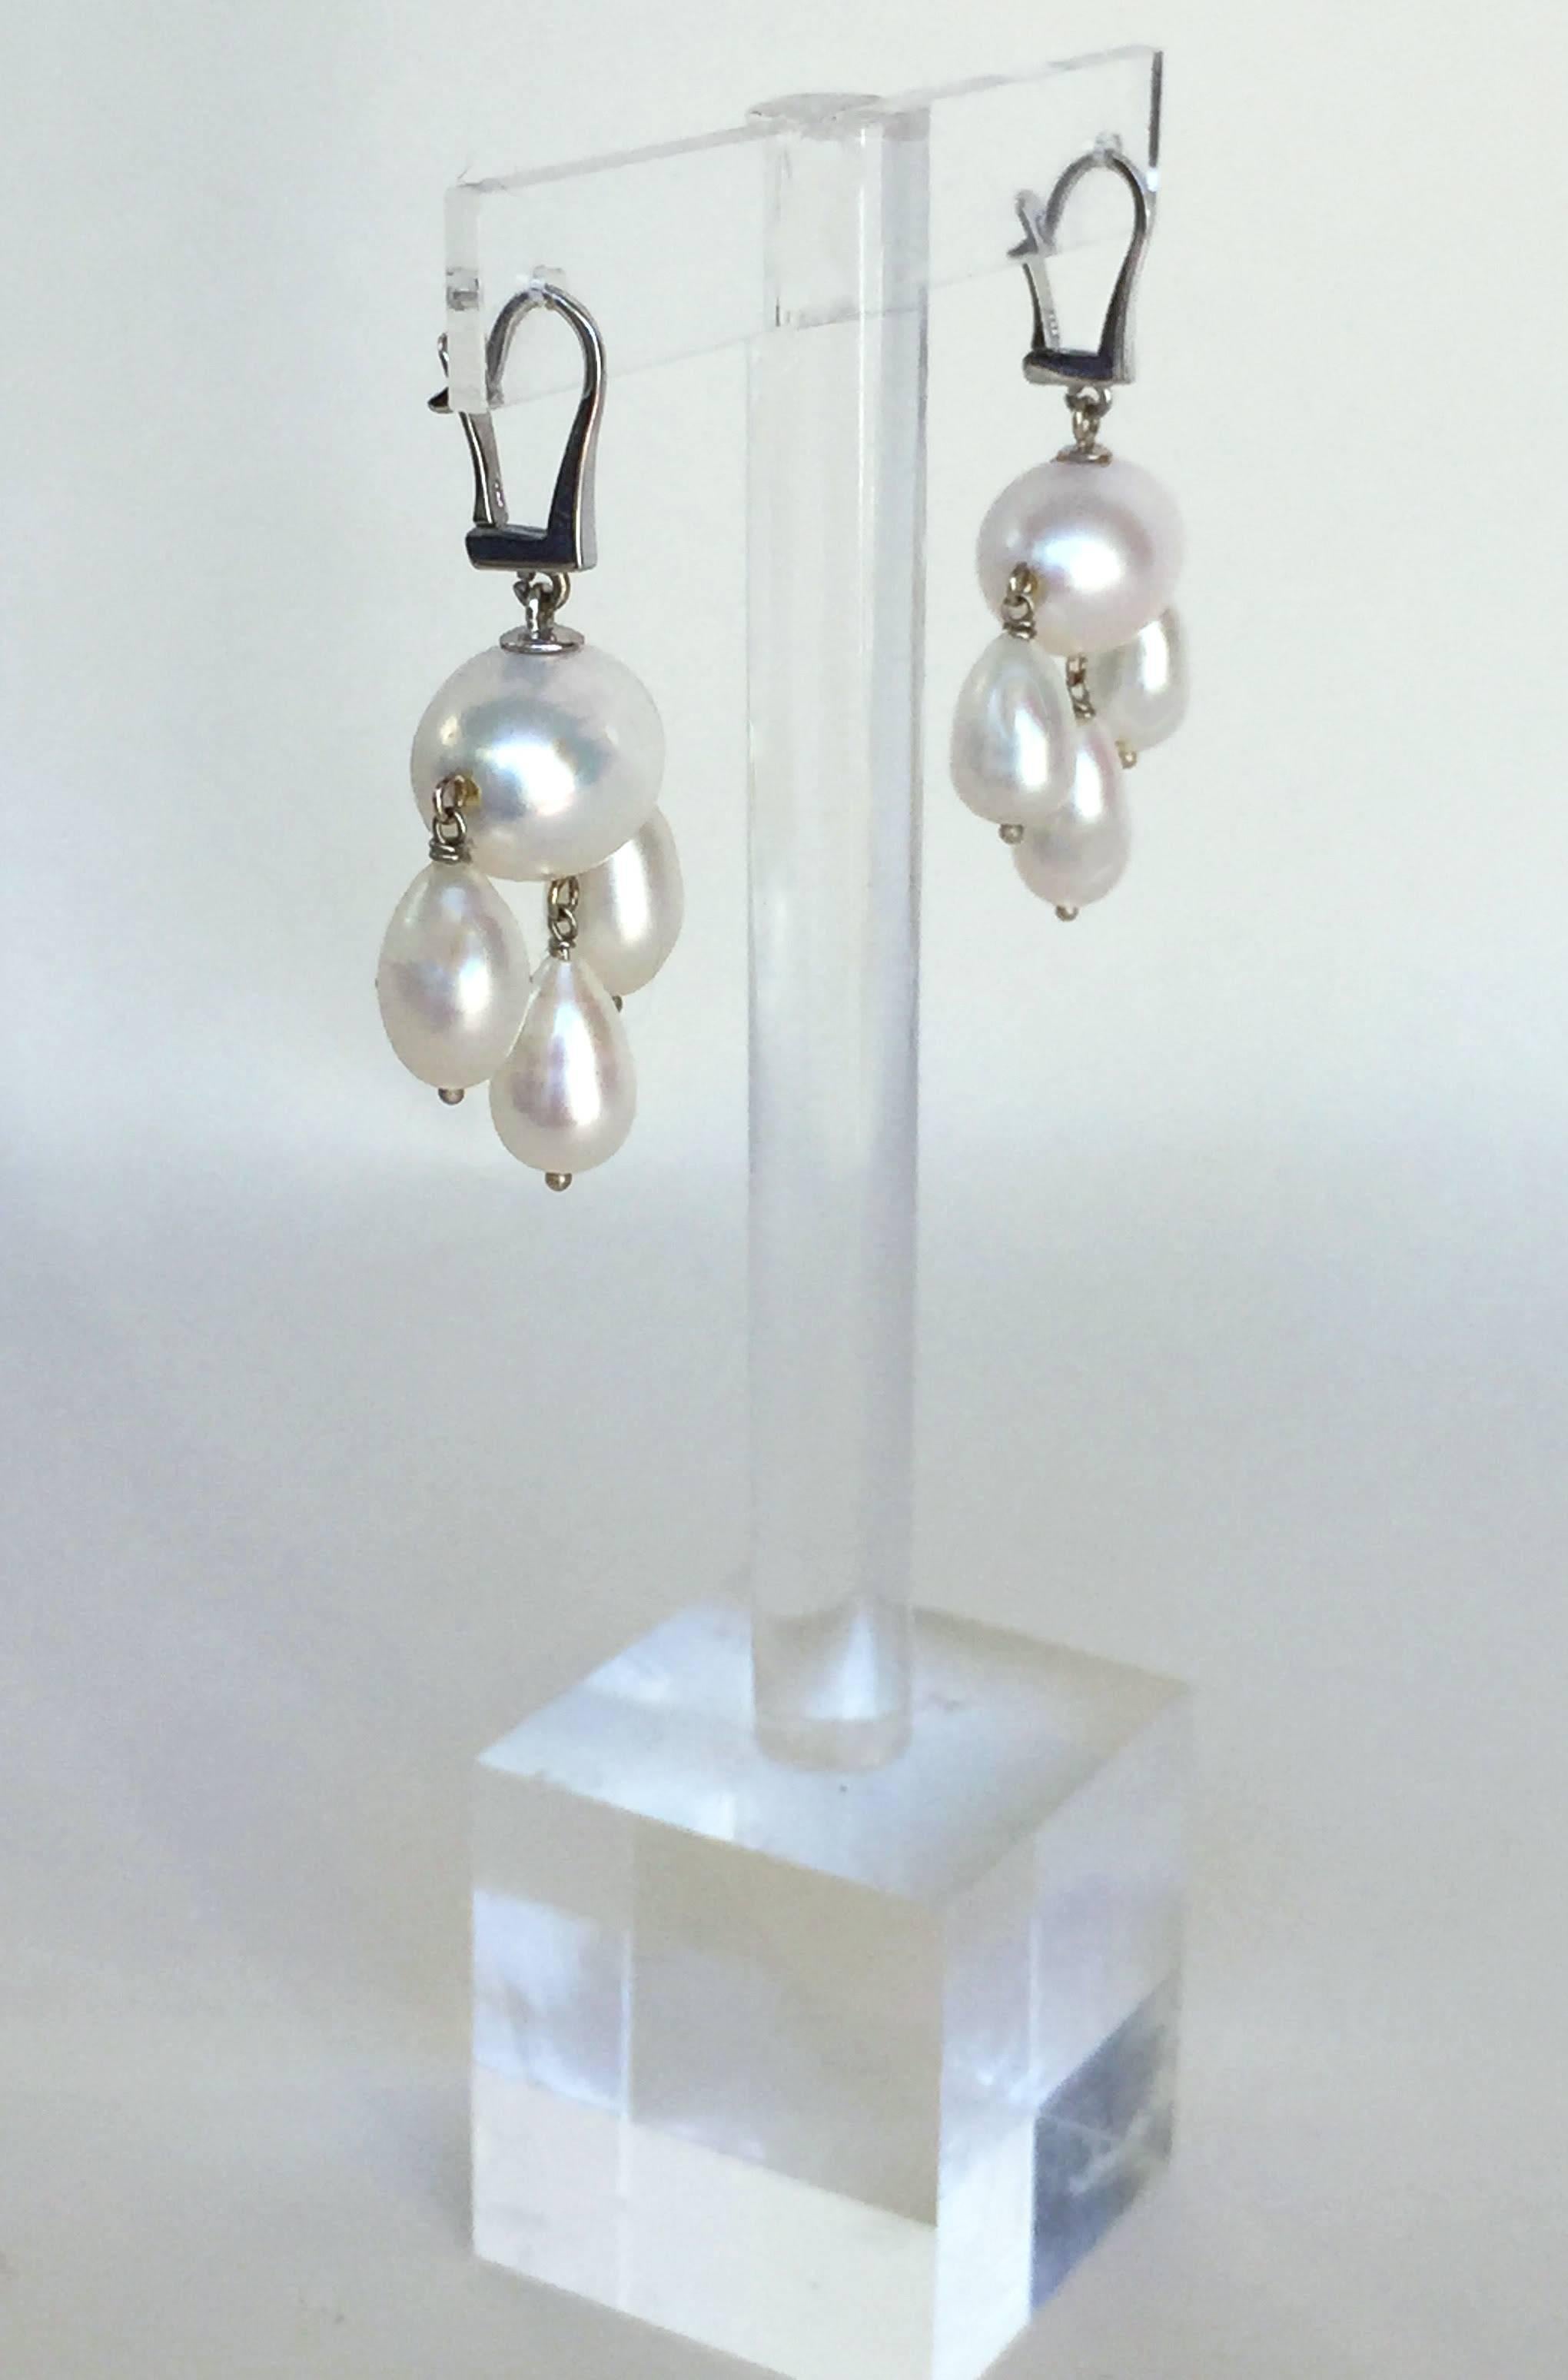 These pearls were chosen by Marina J glistening white color. They are highlighted by the 14k white gold finish and lever back. They dangle at 1.5 inches, a wonderful reinvention of the classic pearl earrings. These white pearl dangle earrings are